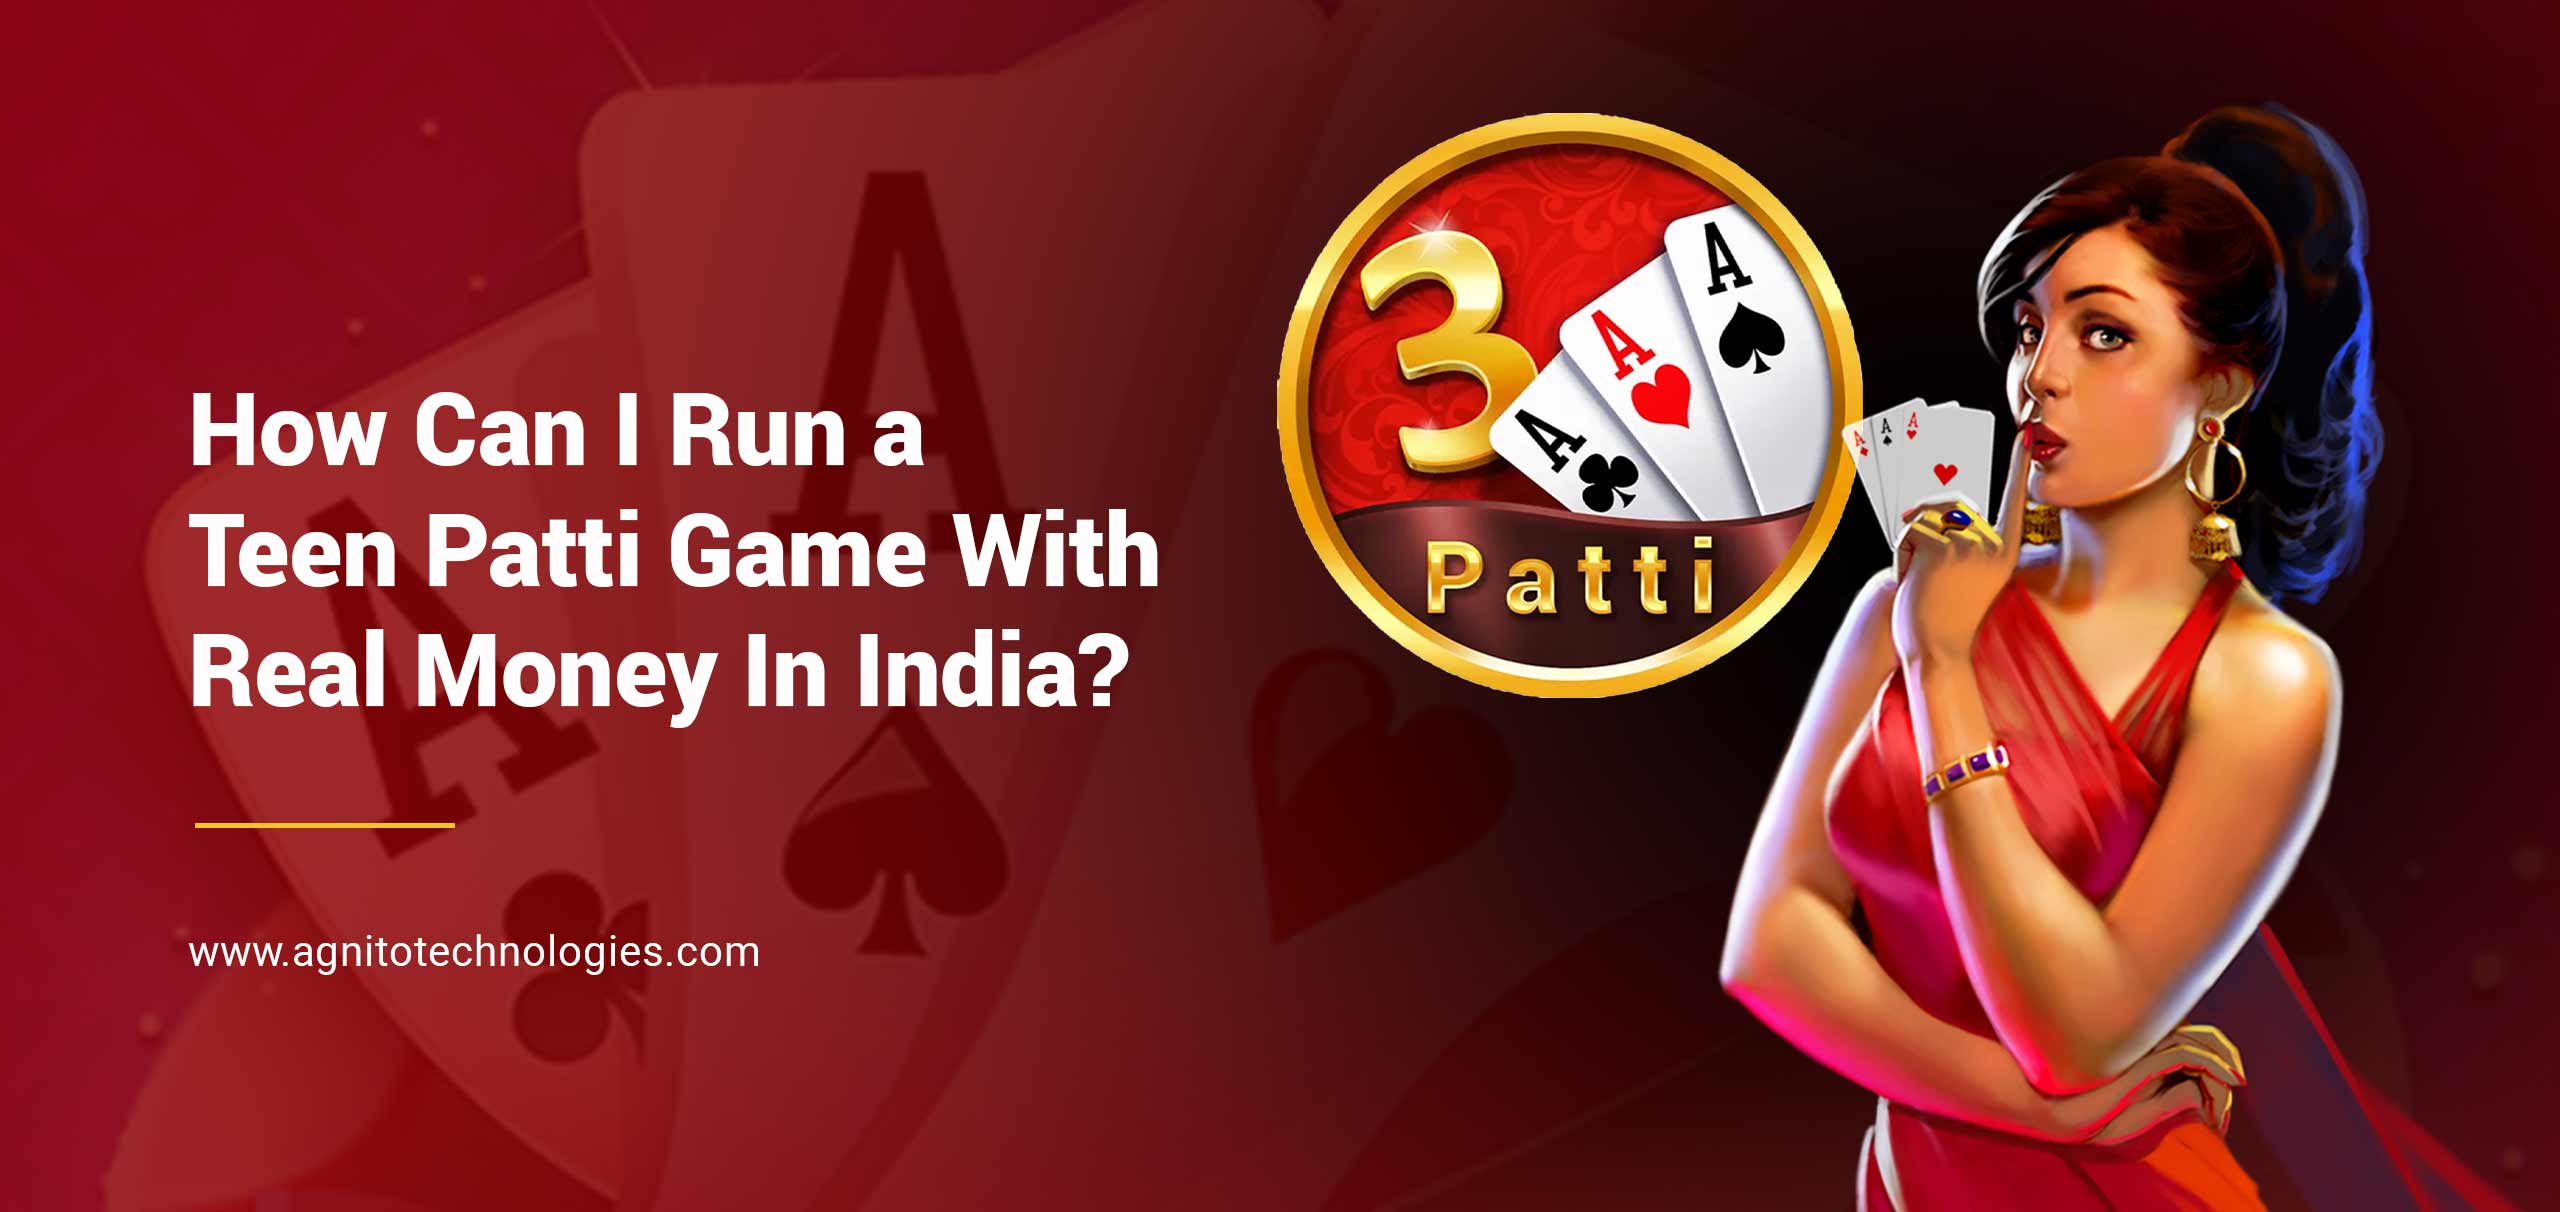 How-Can-I-Run-a-Teen-Patti-Game-With-Real-Money-In-India